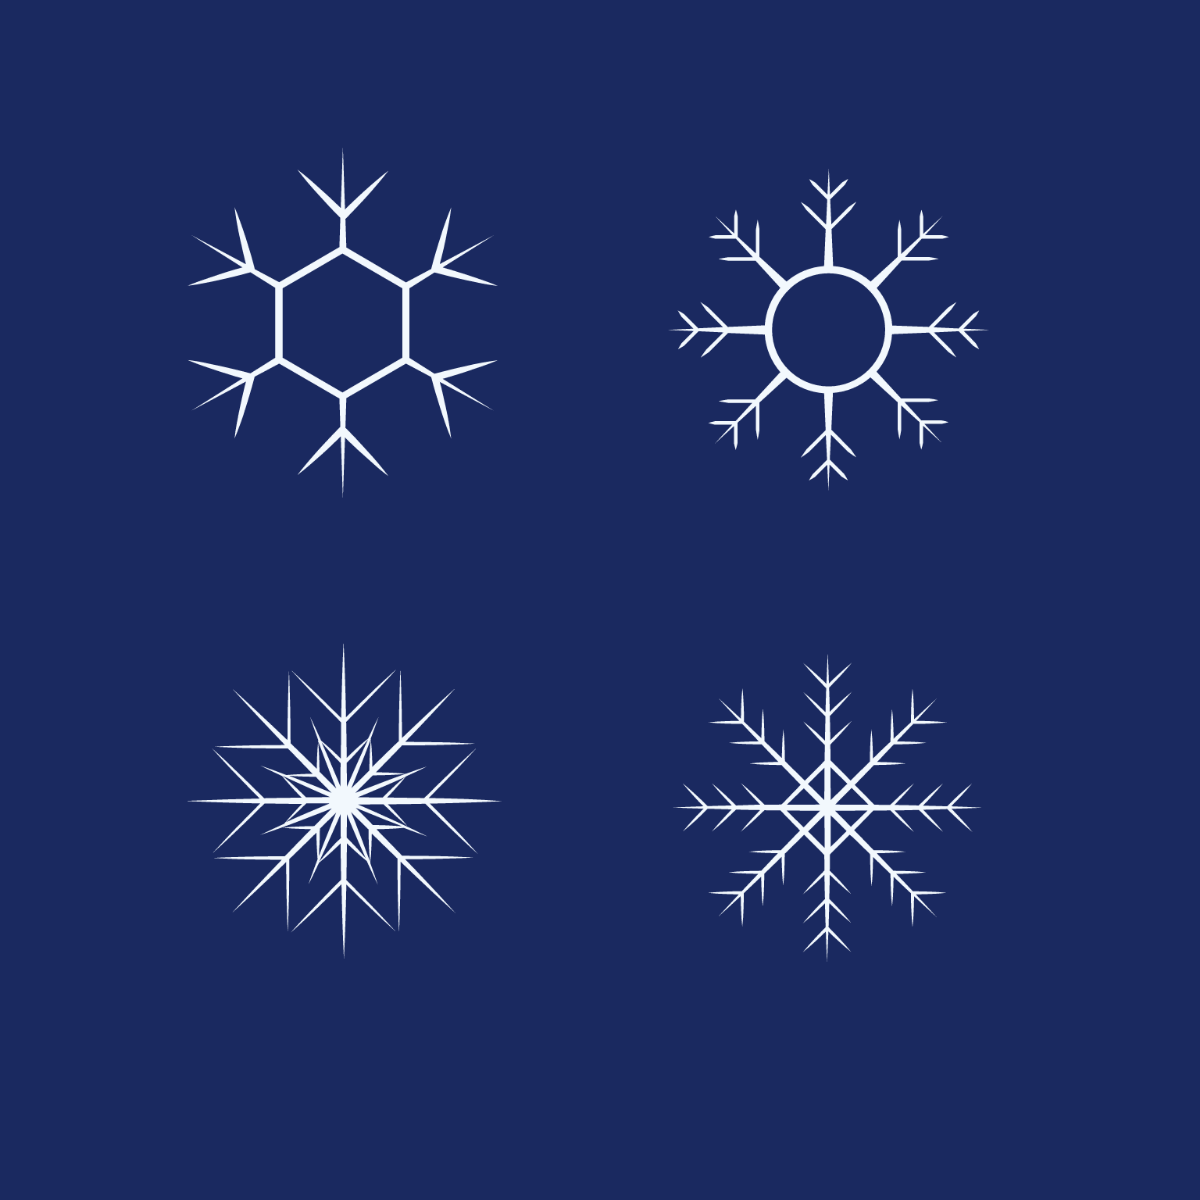 Free Frozen Snowflakes Vector Template